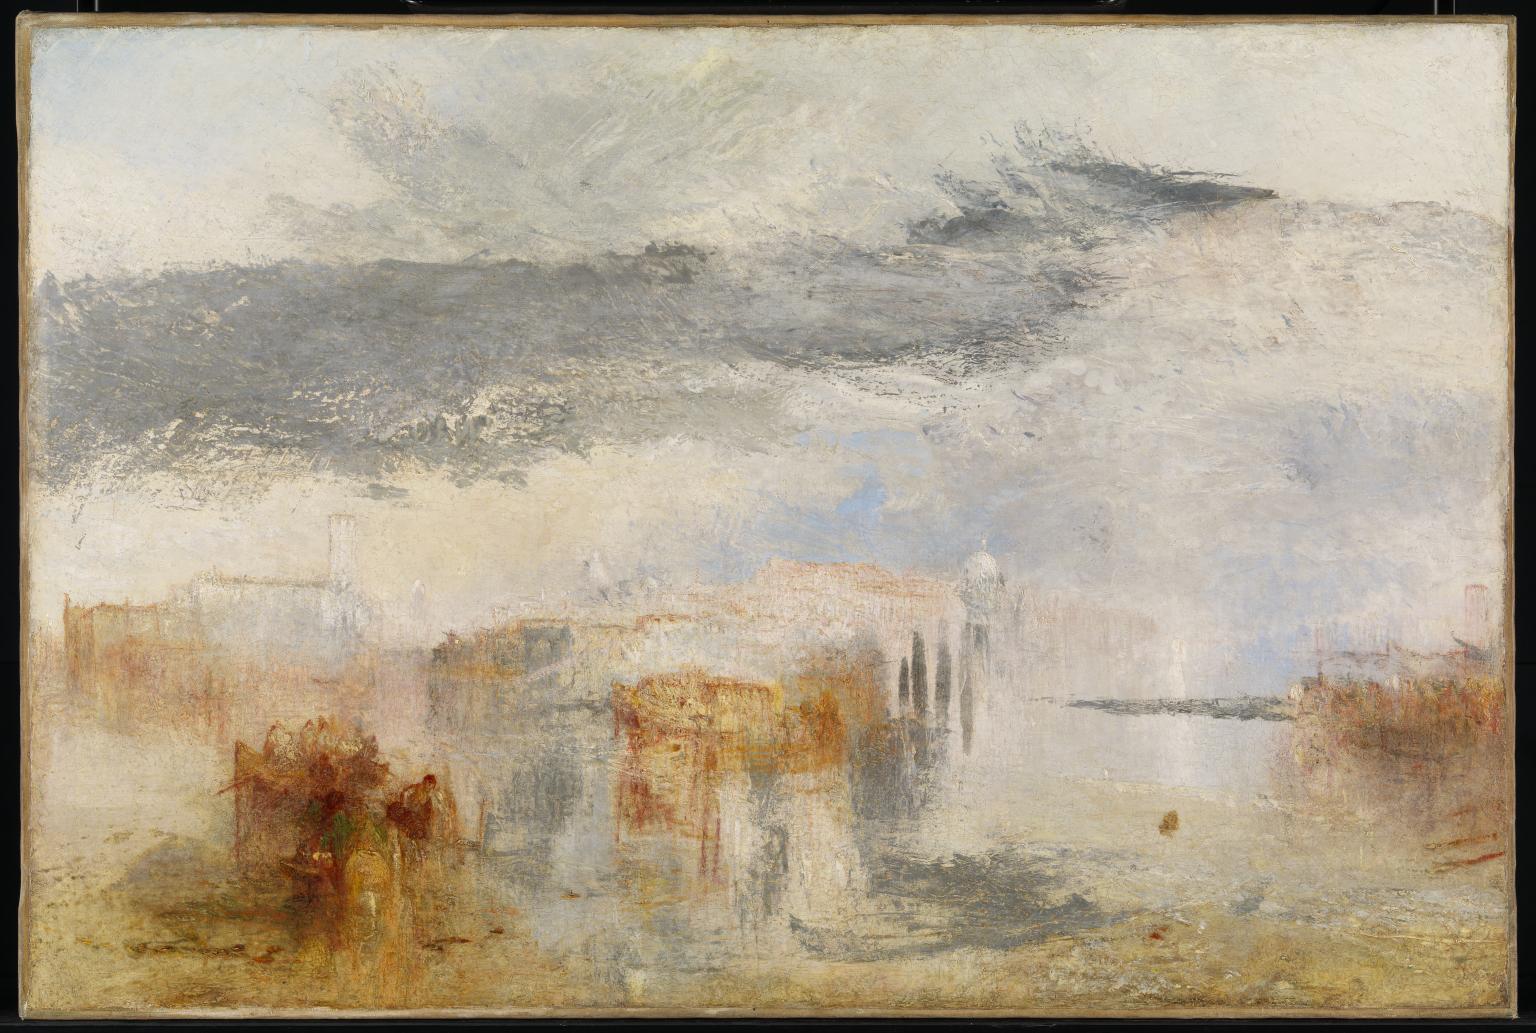 Venice - Sunset, a Fisher exhibited 1845 by Joseph Mallord William Turner 1775-1851